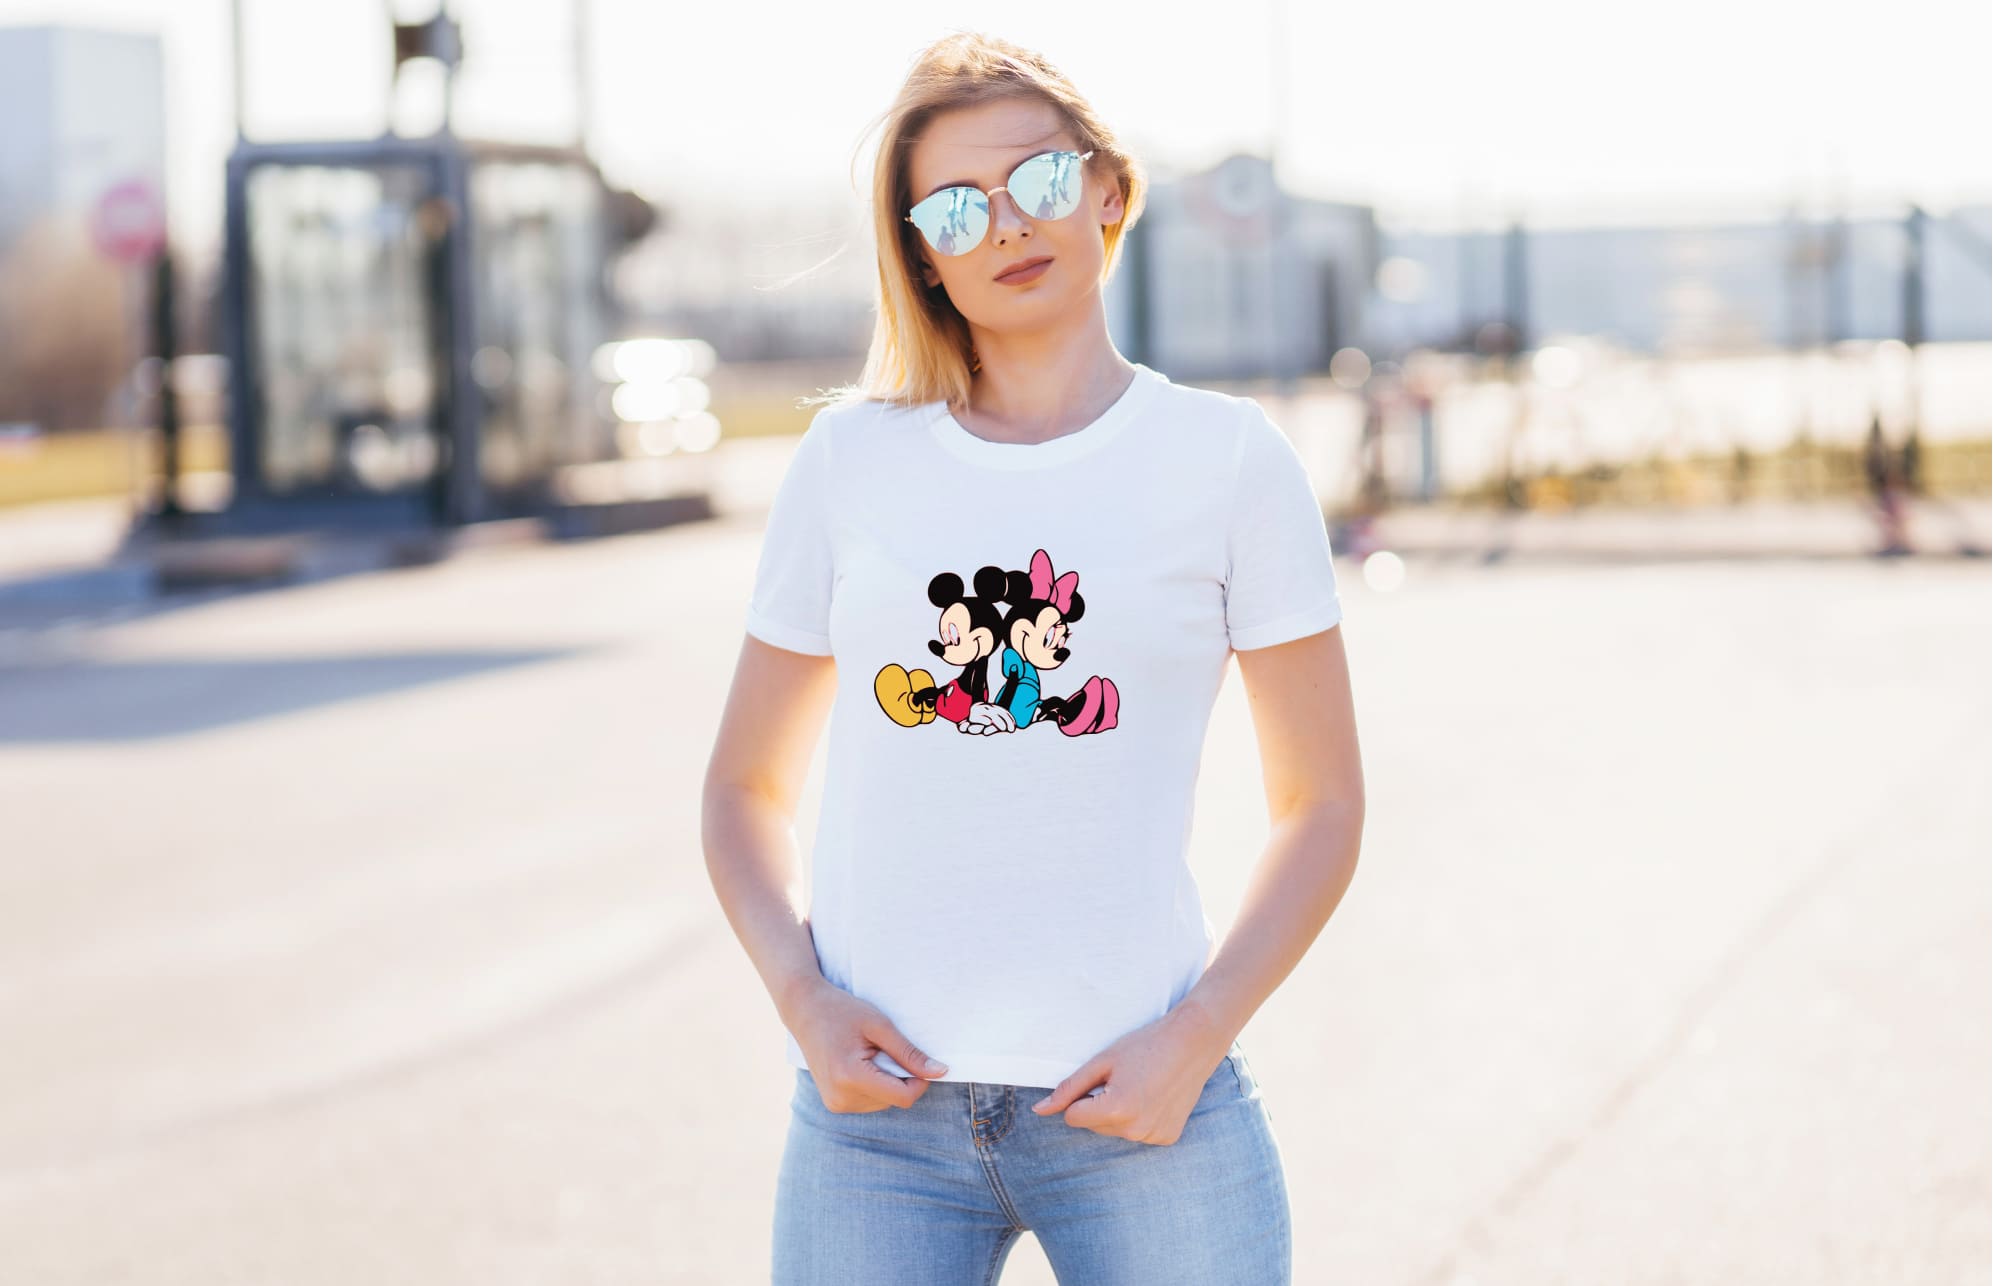 Two mickey mouses on the simple white t-shirt.